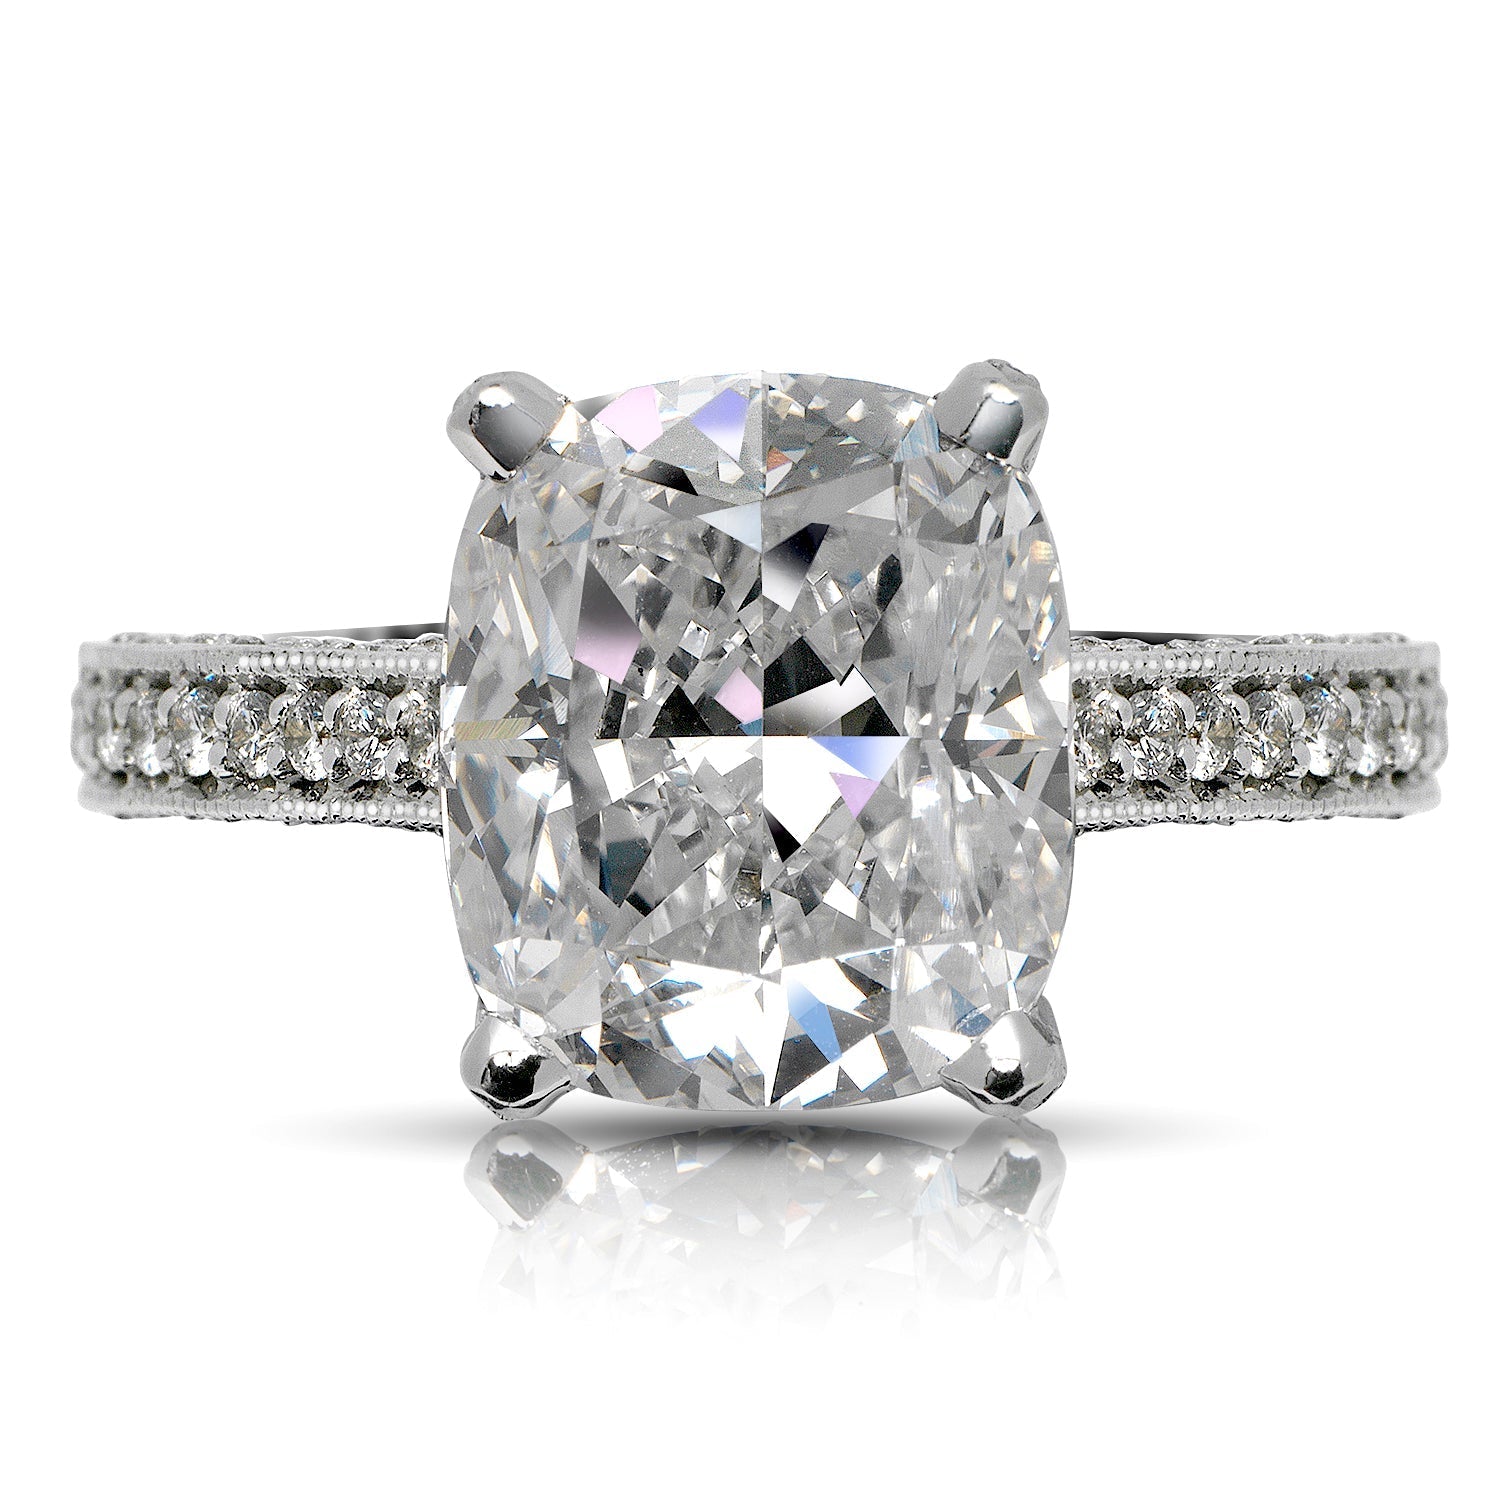 Solitaire Engagement Rings | Blue Nile